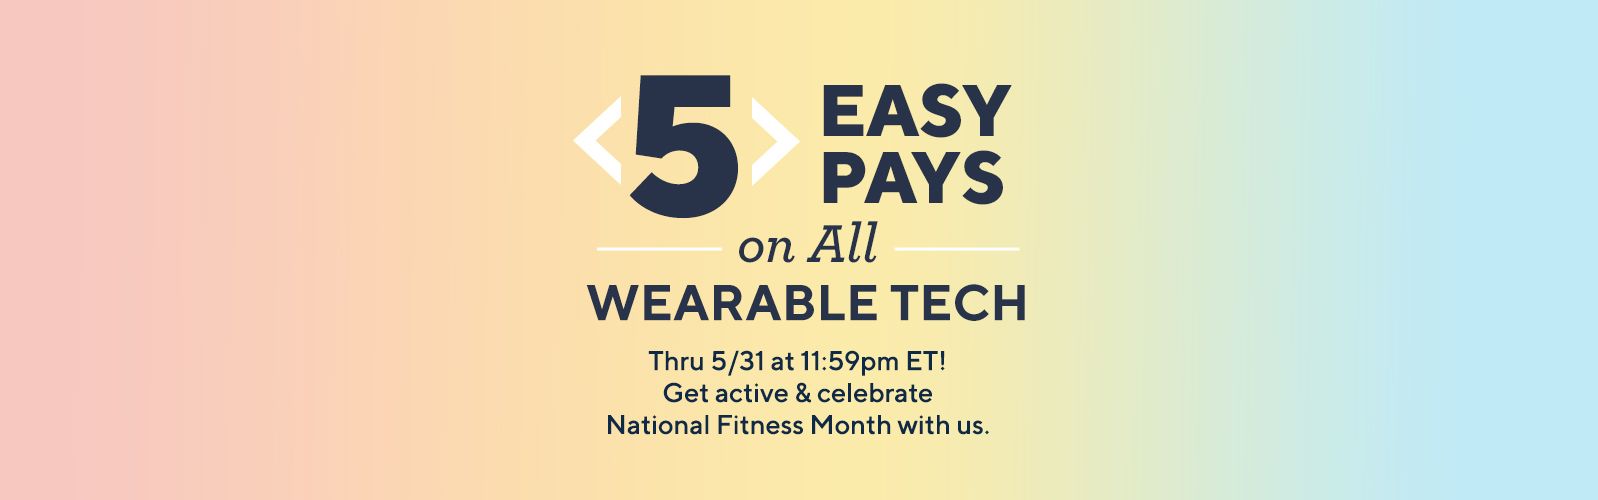 5 Easy Pays on All Wearable Tech.  Thru 5/31 at 11:59pm ET! Get active & celebrate National Fitness Month with us.